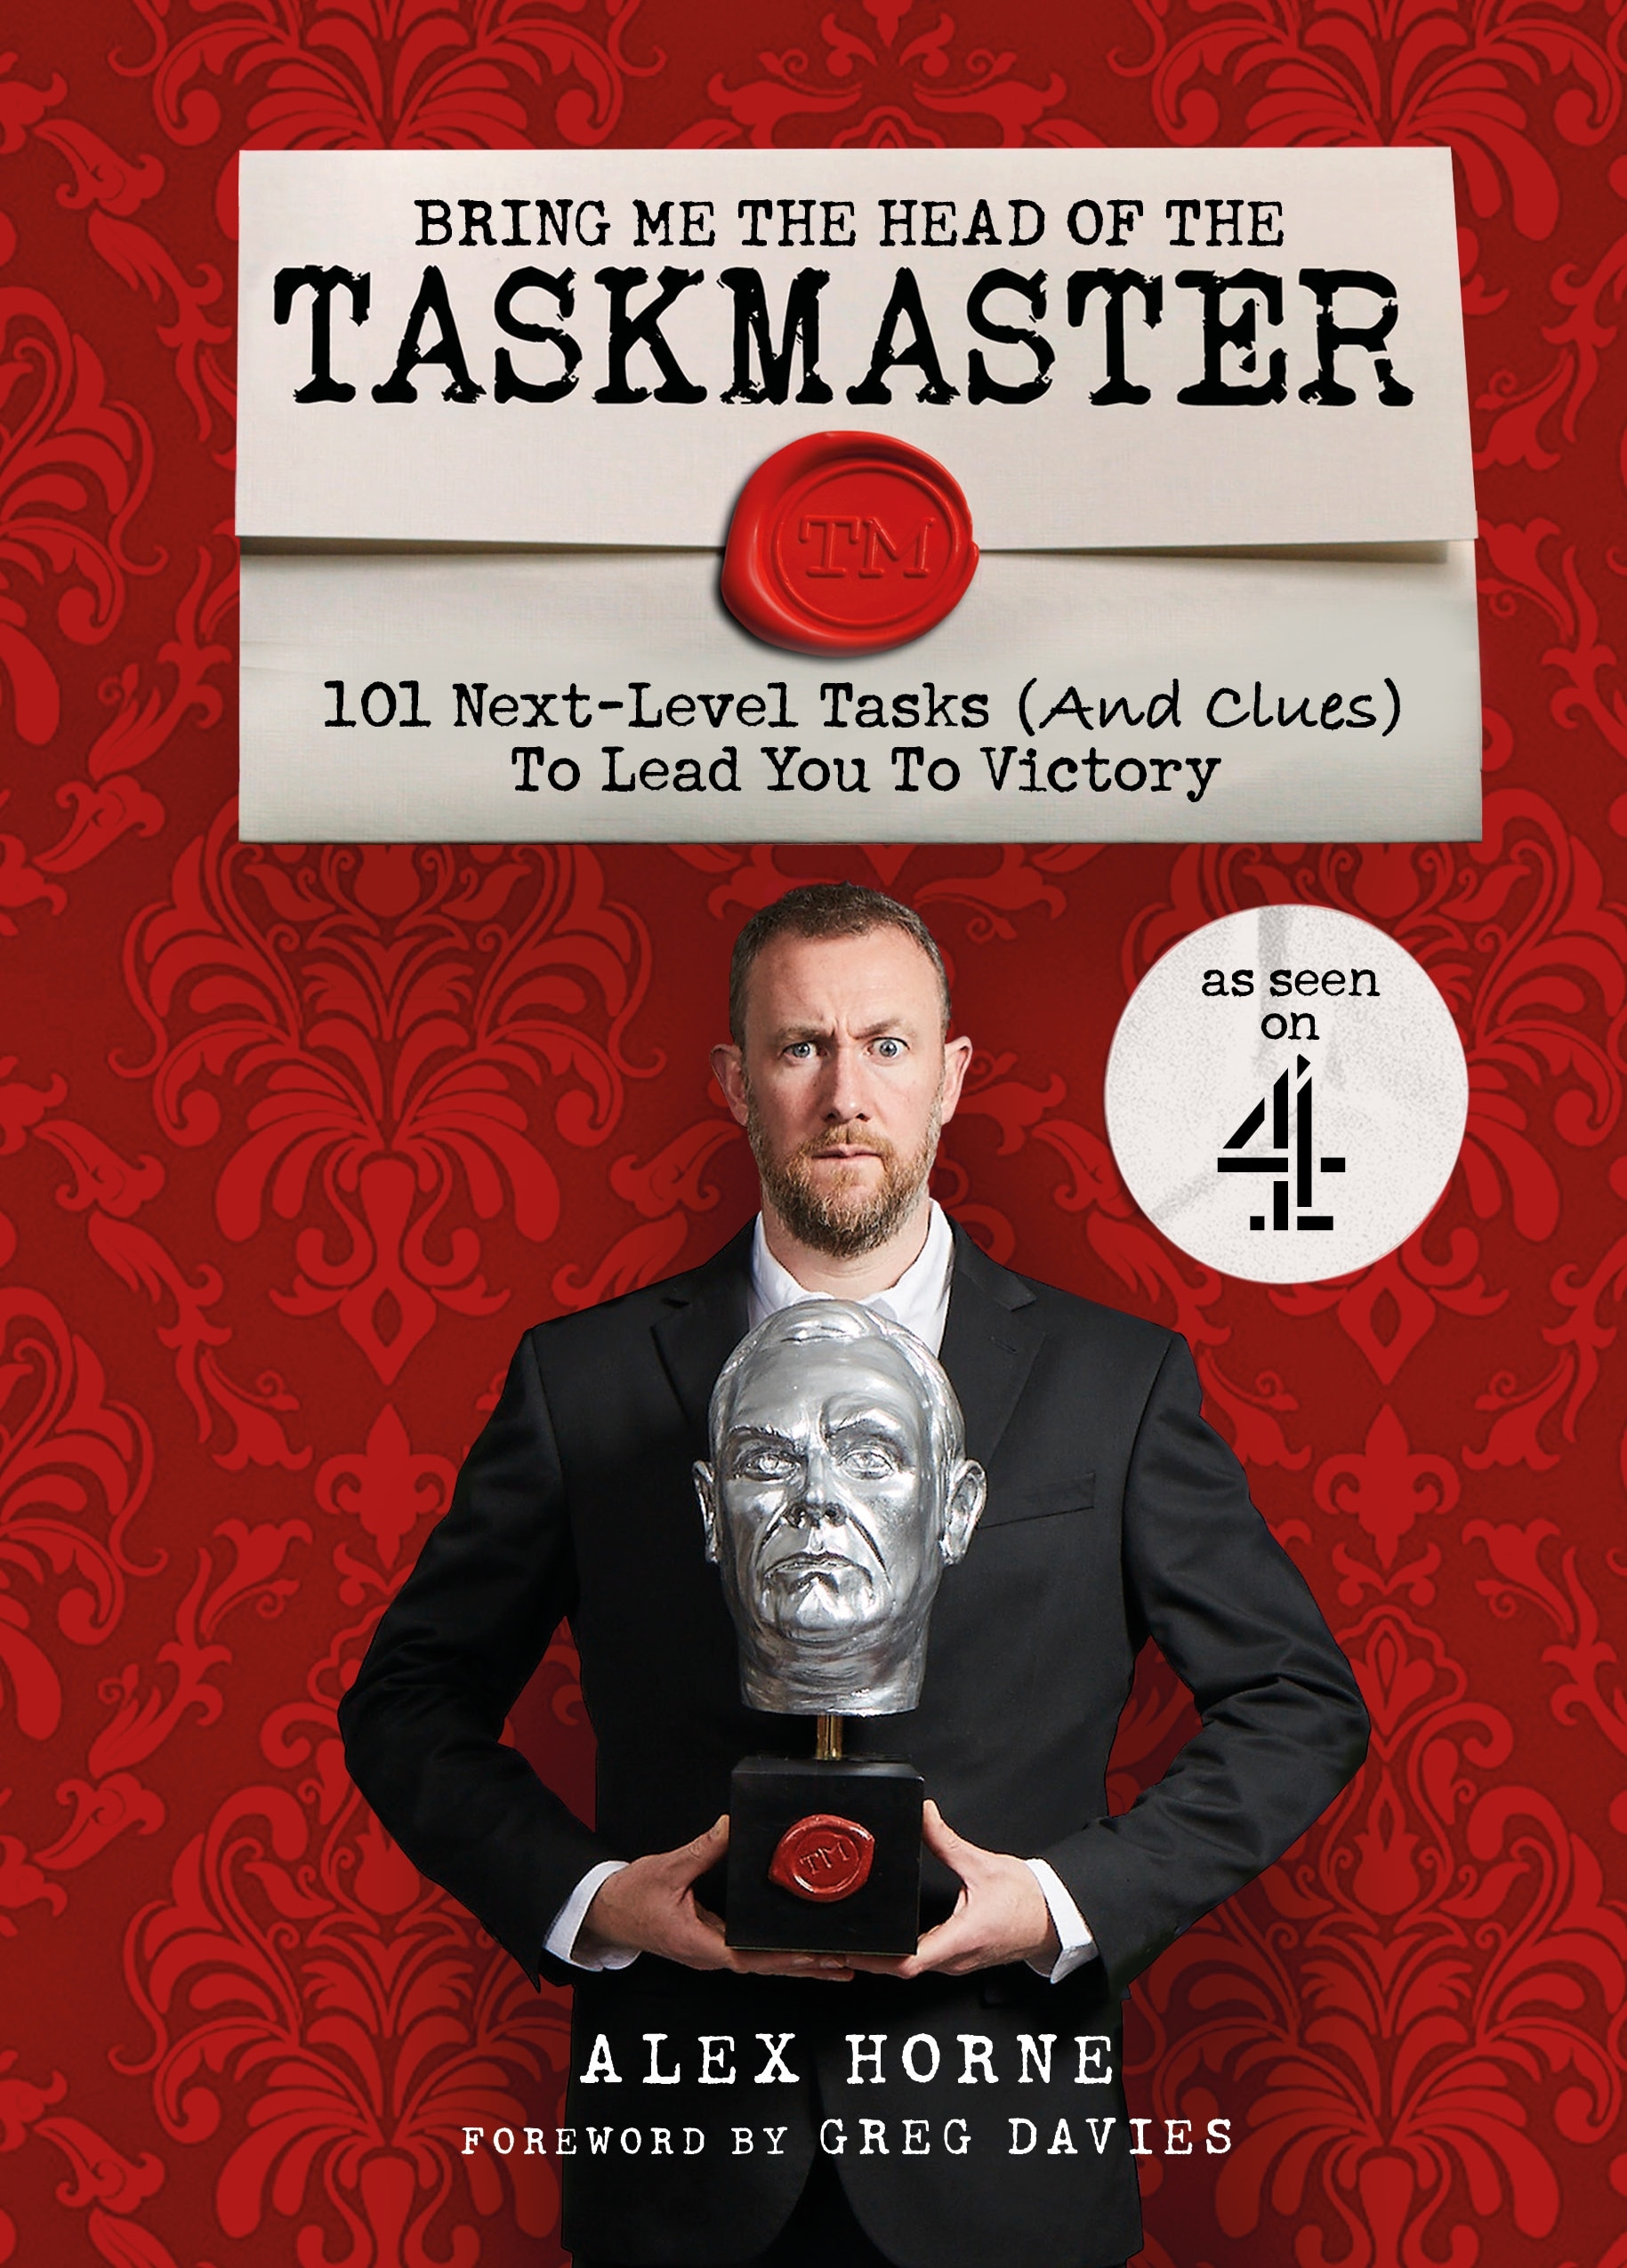 Book “Bring Me The Head Of The Taskmaster” by Alex Horne — September 16, 2021